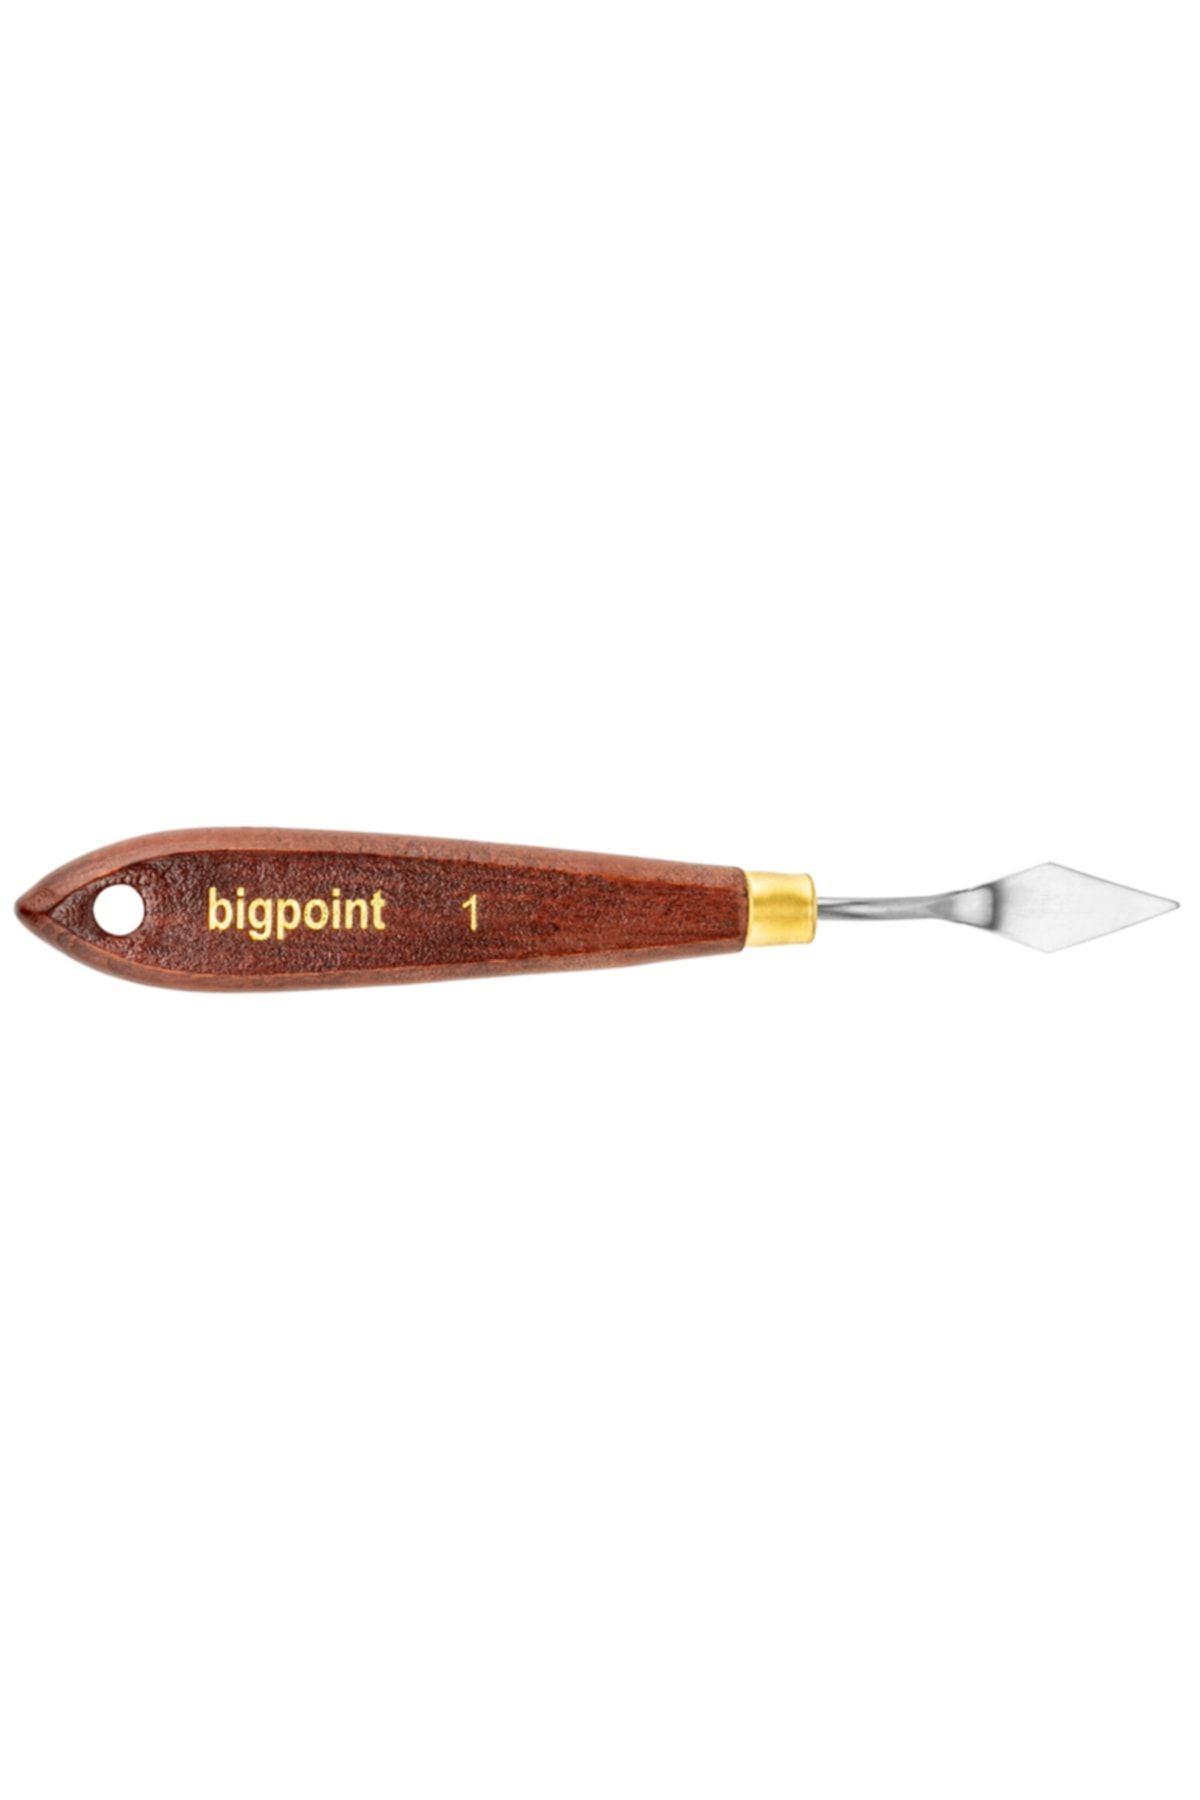 Bigpoint Metal Spatula No: 1 (painting Knife)